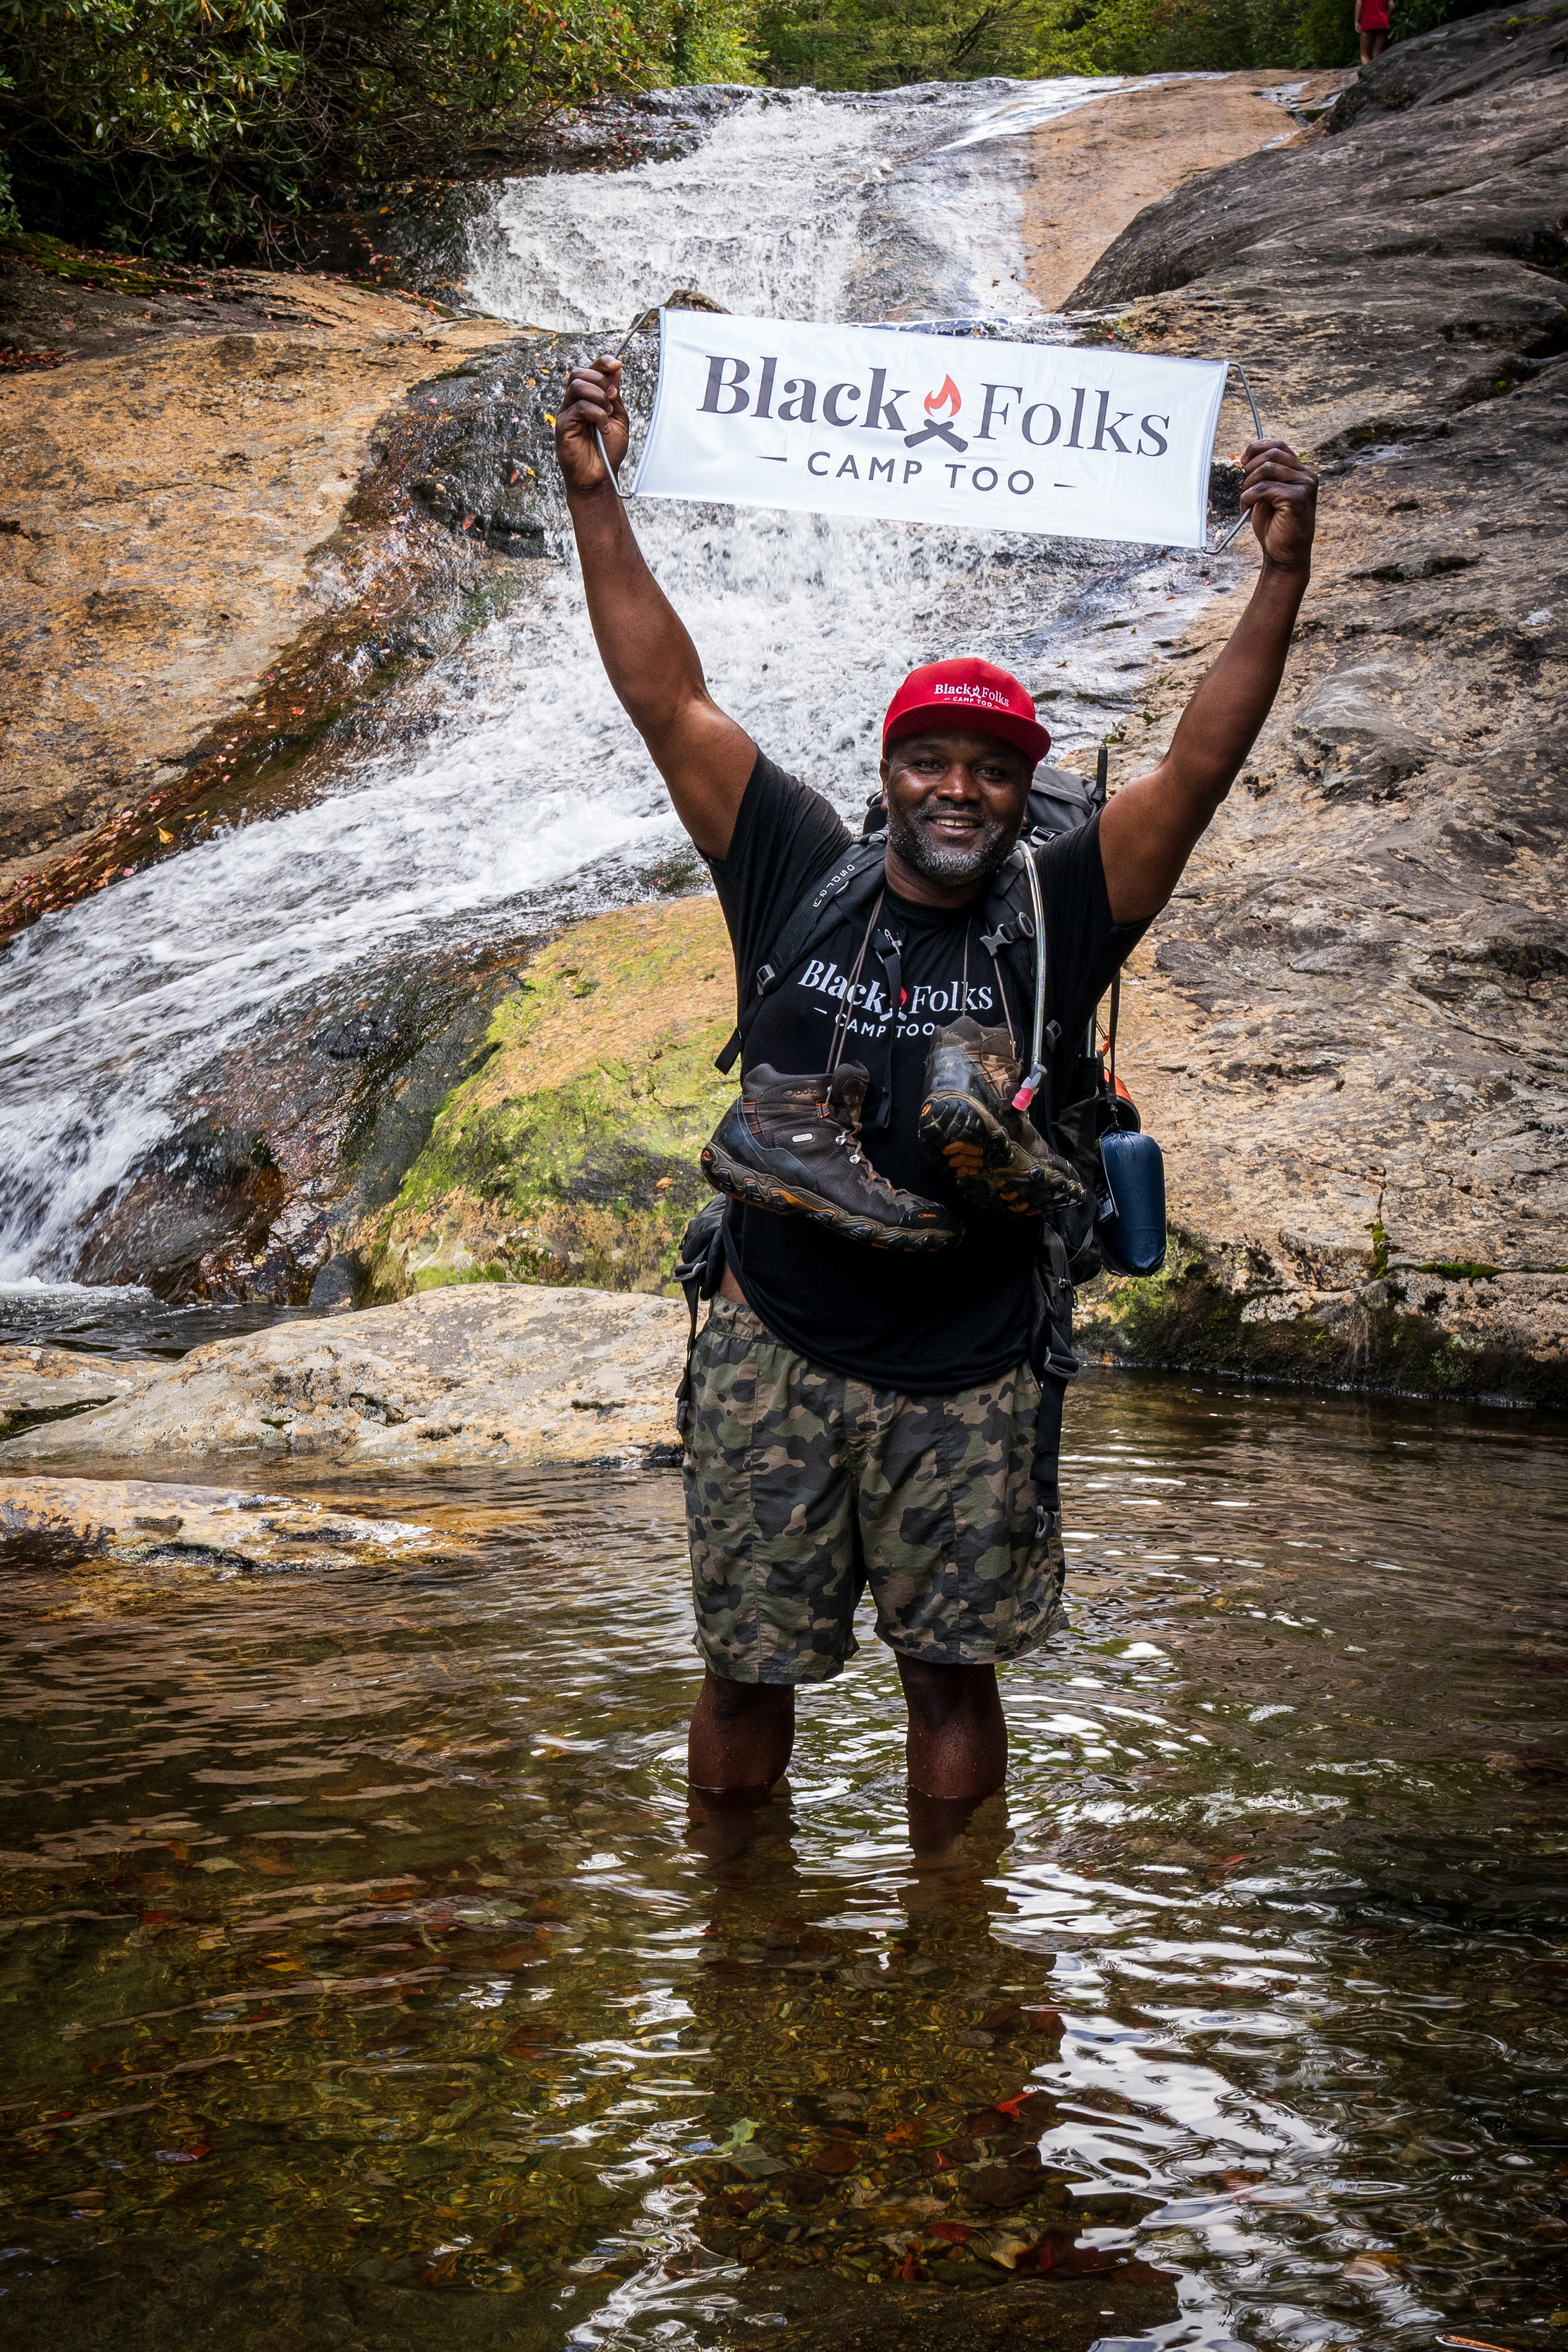 Earl Hunter in front of a waterfall holding up a Black Folks Camp Too sign